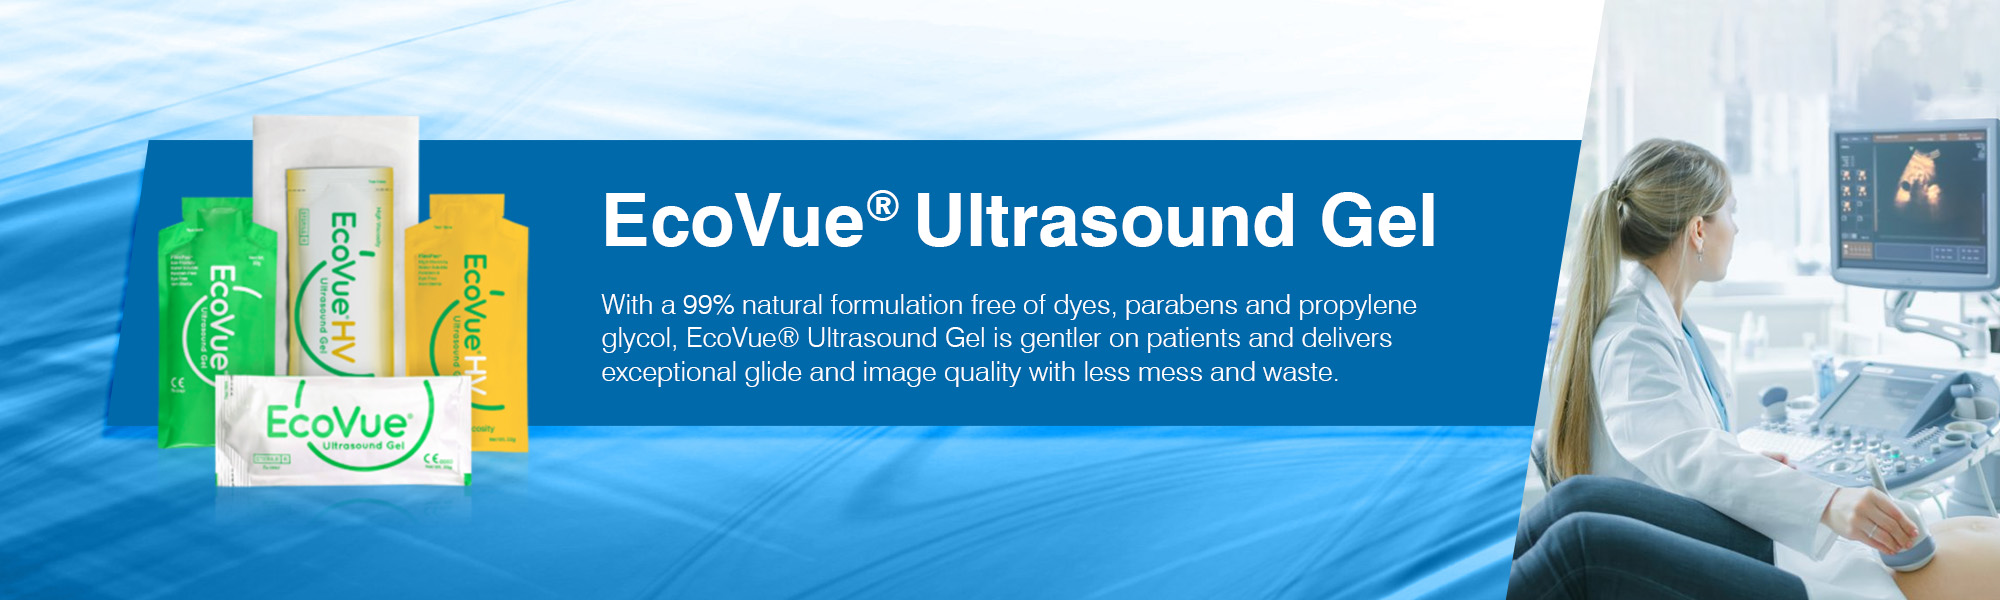 Imaging Solutions Introduces EcoVue Ultrasound Gel and Warmers to Deliver Exceptional Glide and Image Quality with Less Mess and Waste.